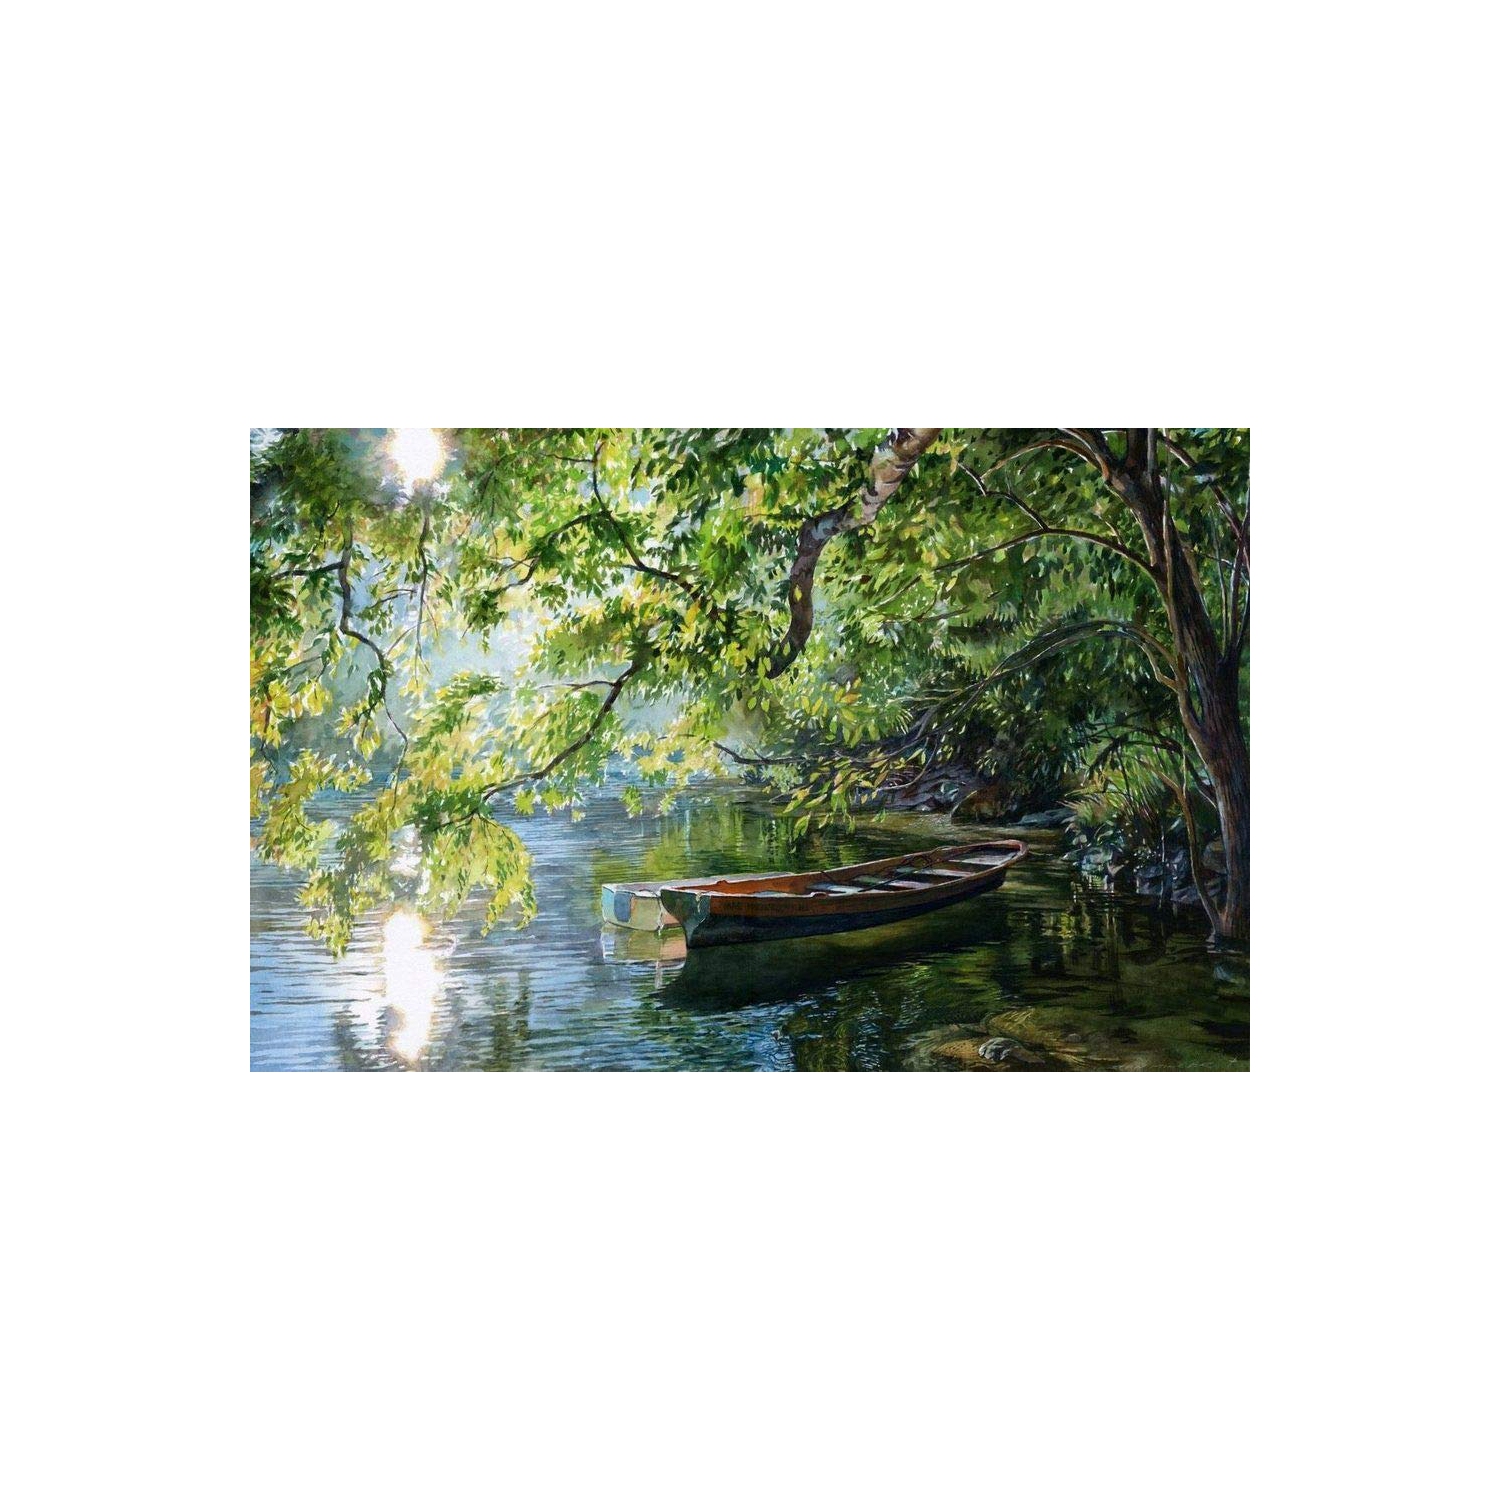 Bay Breeze Paint By Numbers Kit - DIY Canvas Painting for Kids and Adults | Pre-Printed Art-Quality Drawing | Includes 4 Paintbrushes | Fishing Boat Design | 16x20 Rolled Canvas |